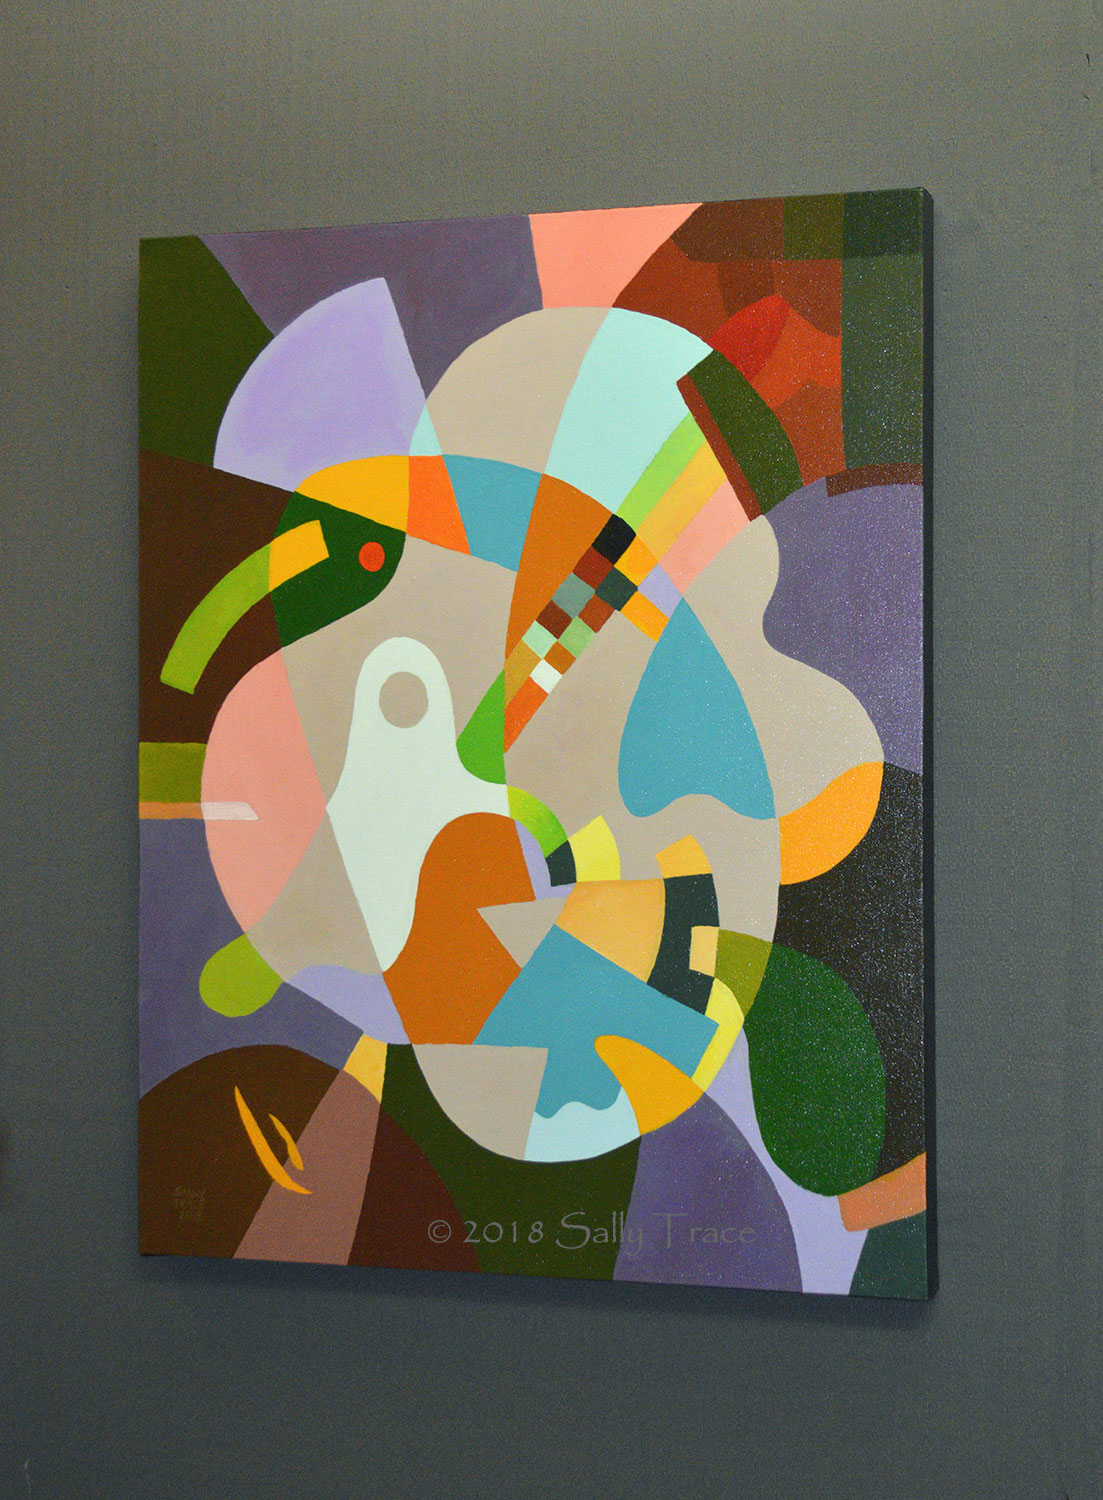 "Sometimes you Just get Lucky" geometric hard-edged original acrylic painting by Sally Trace